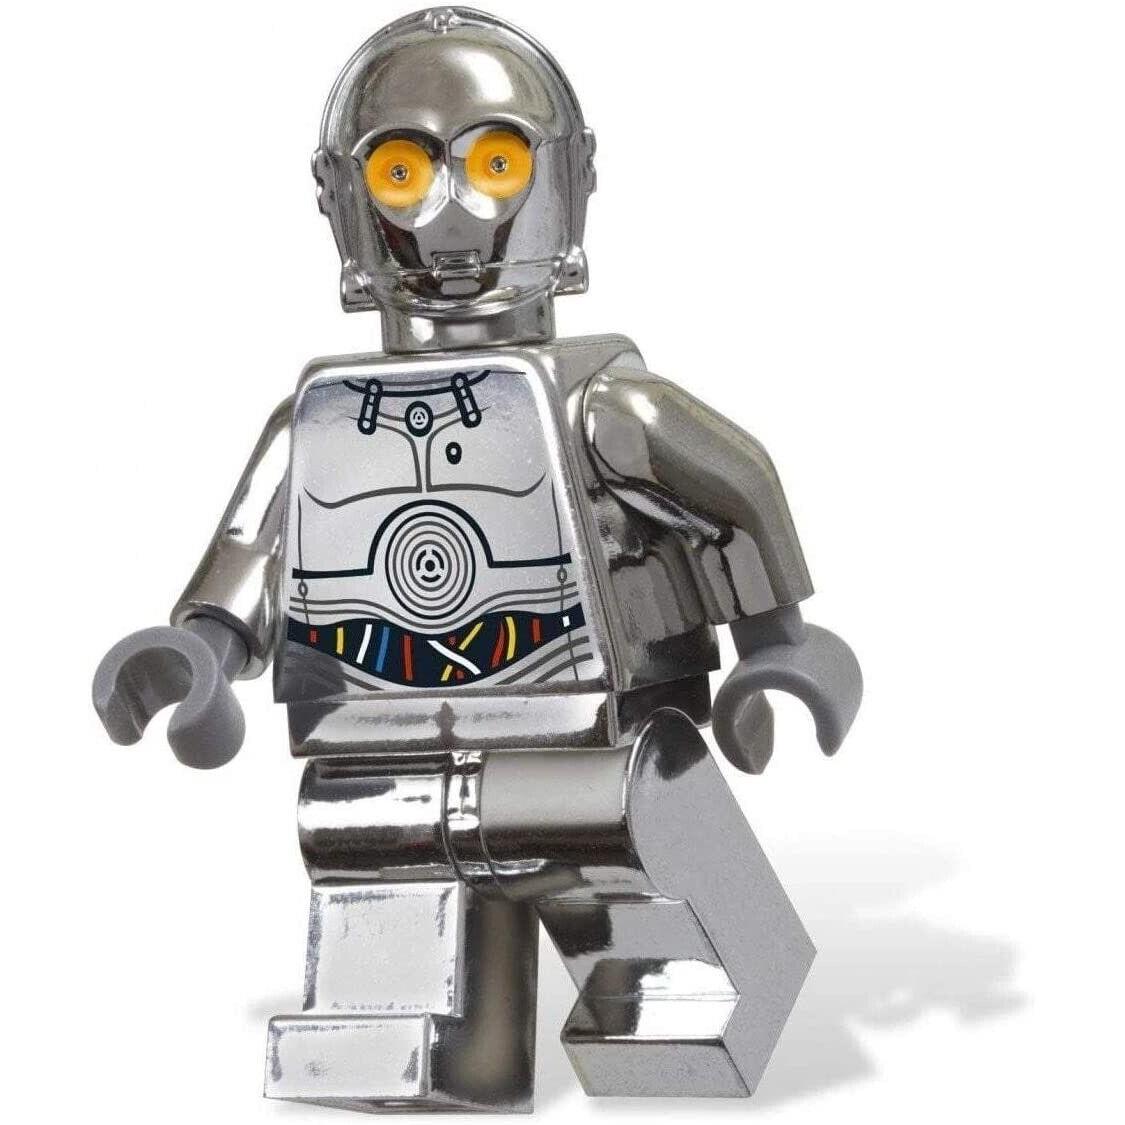 Lego Star Wars 5000063 TC-14 Minifigure Silver Chrome Exclusive Limited